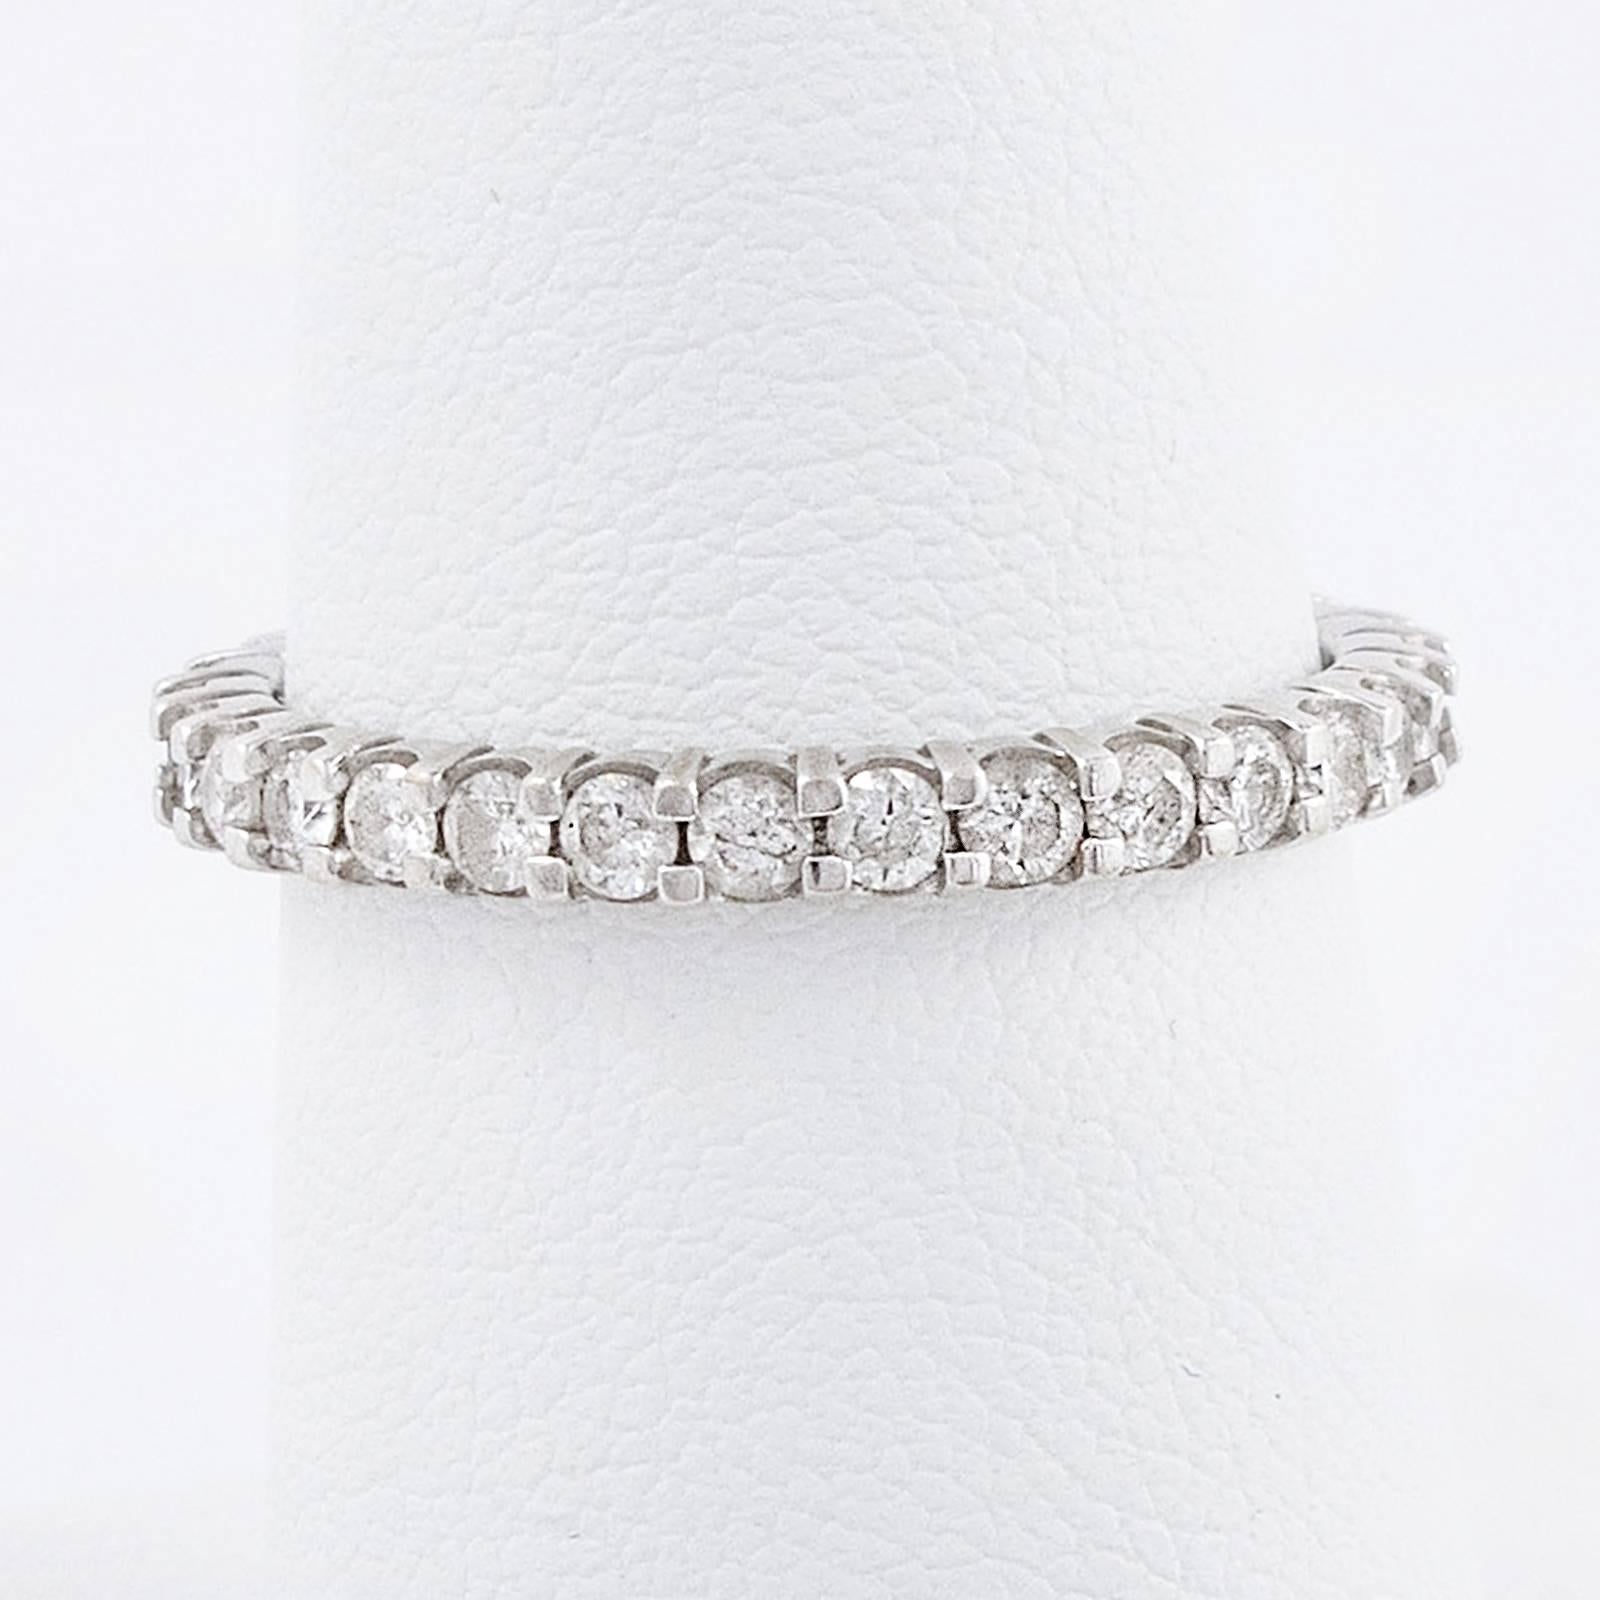 An elegant Eternity/Stacker band is set with 30 round, brilliant cut Diamonds totaling approximately .60 carats, set in 14K white gold .

The ring was custom crafted, with Diamonds set in the shared claw fashion. Currently a size 6.5, it should not